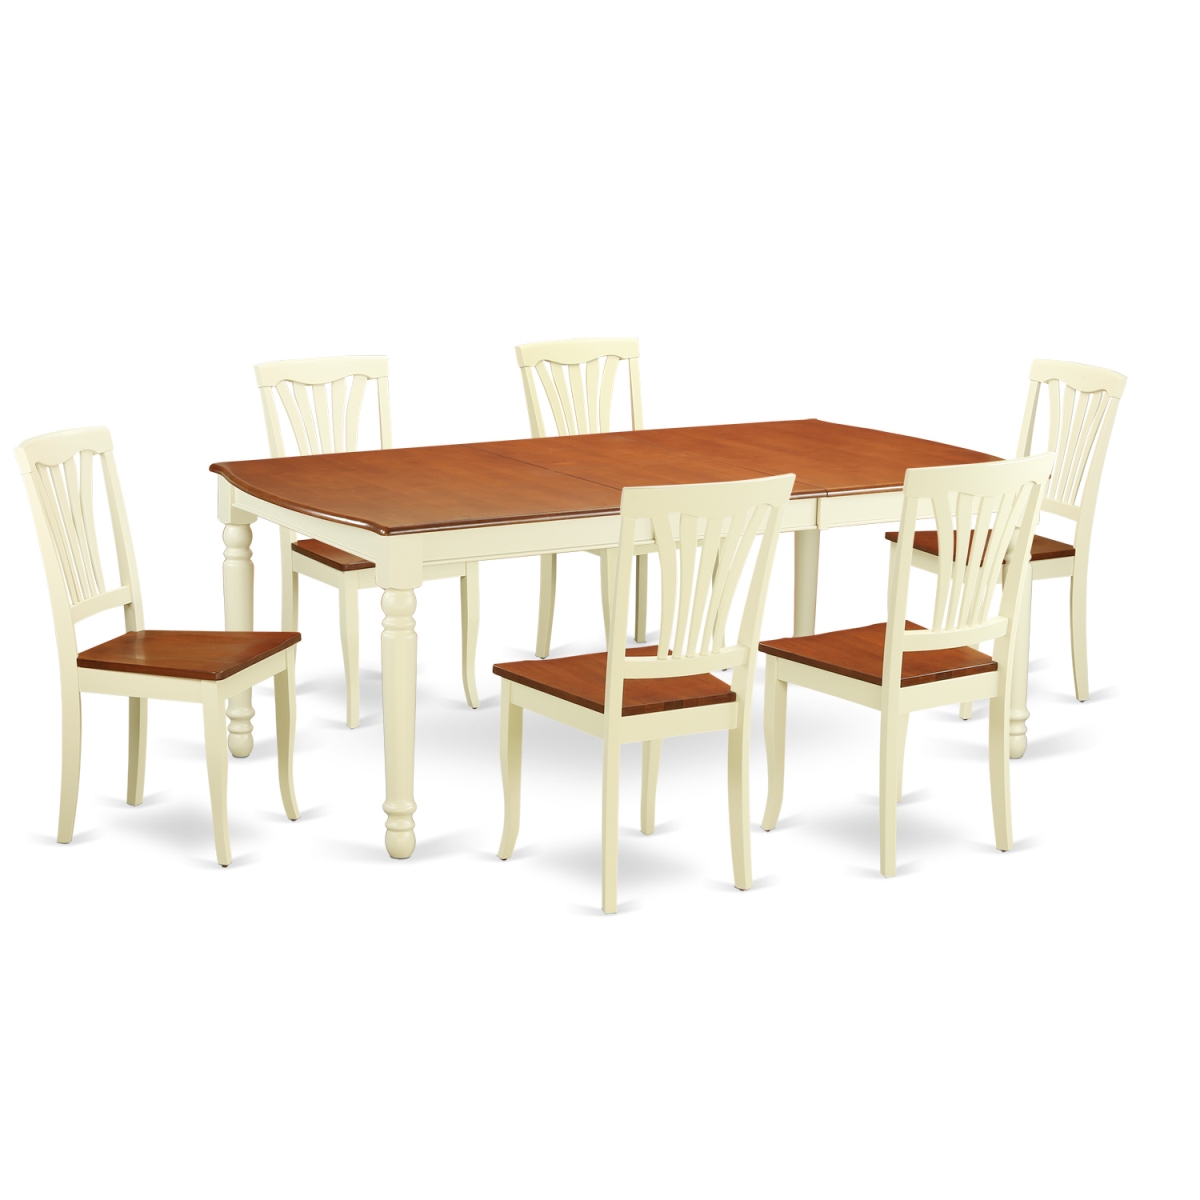 Picture of East West Furniture DOAV7-WHI-W Dinette Table Set - Kitchen Table & 6 Chairs, Buttermilk & Cherry - 7 Piece